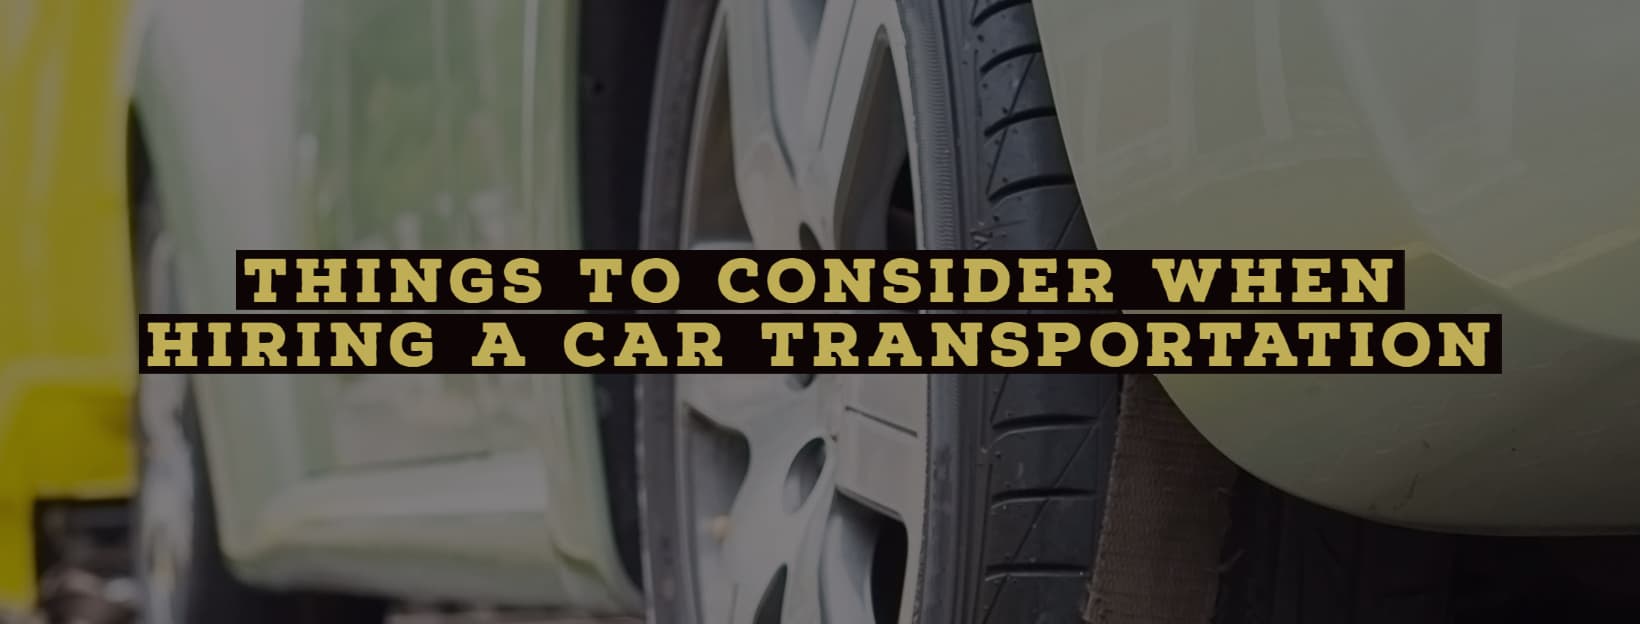 Things to Consider When Hiring a Car Transportation Services